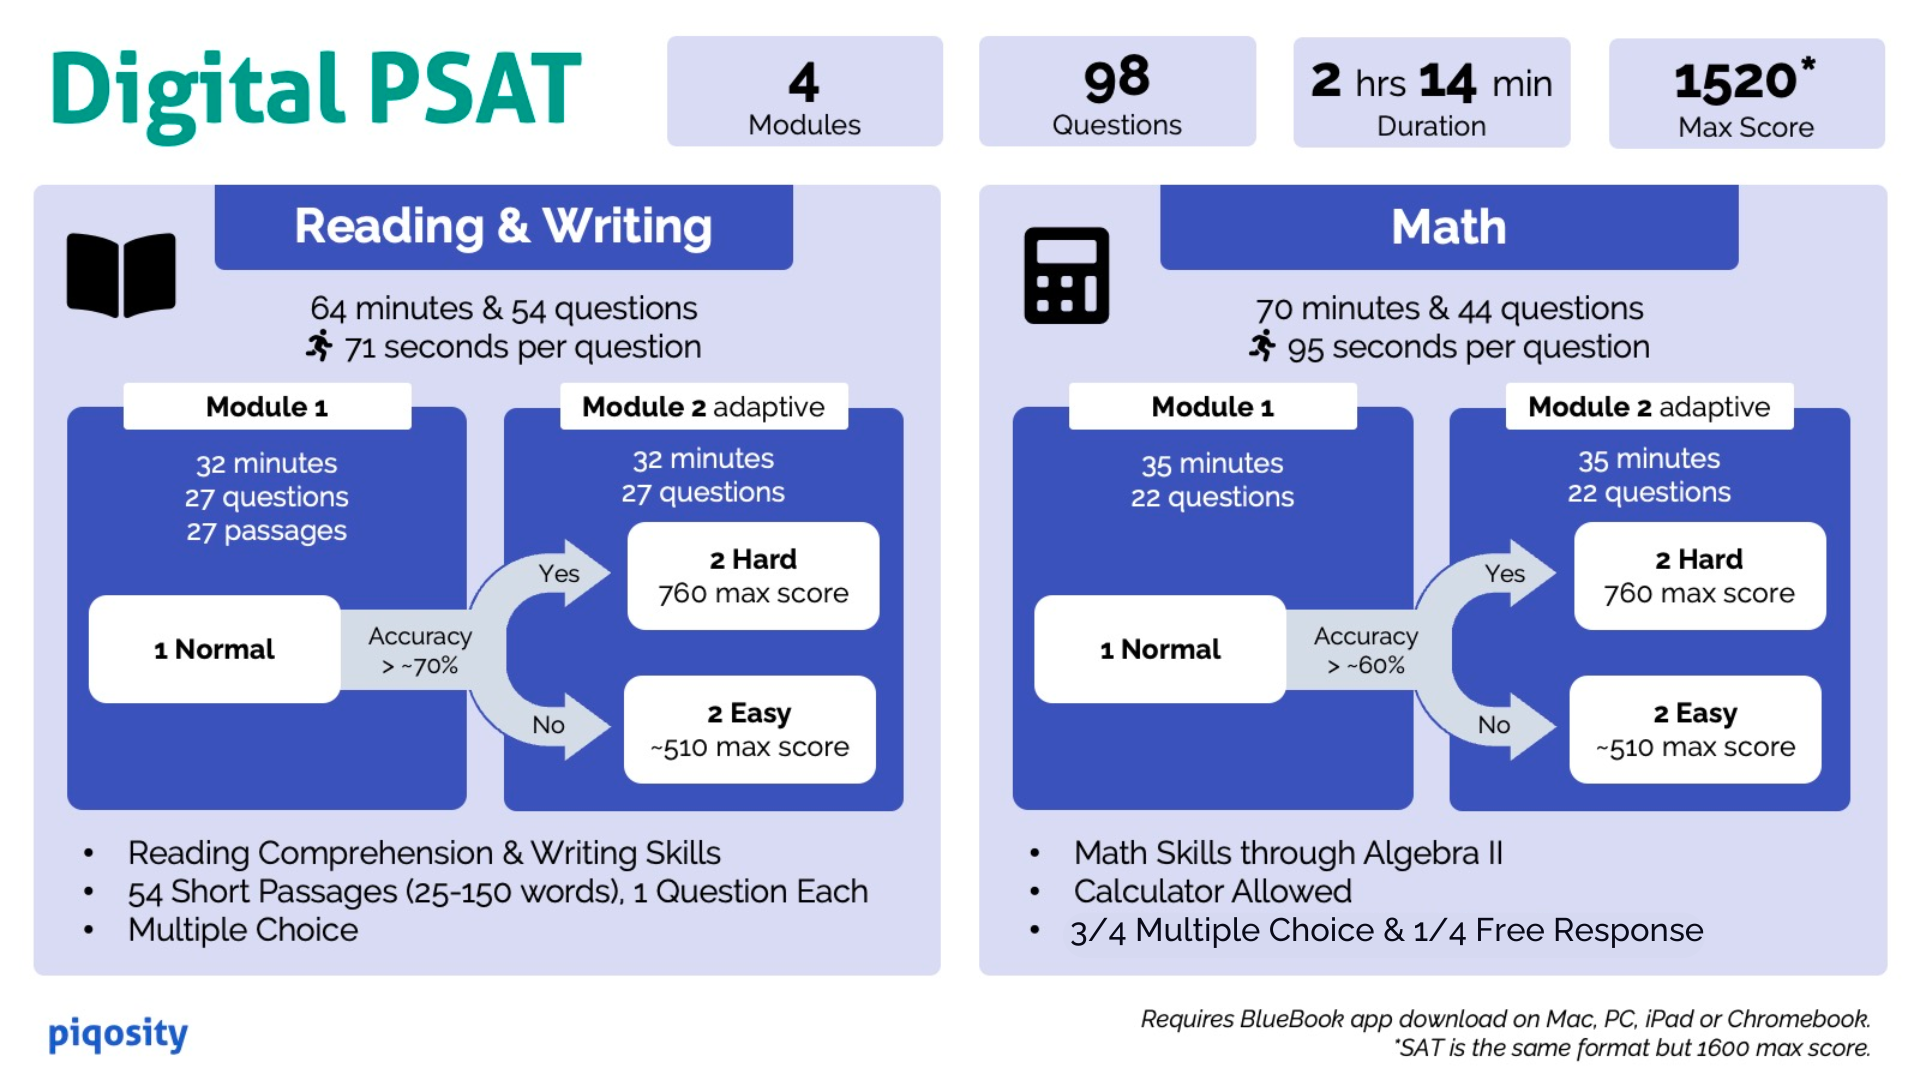 Digital PSAT information including modules, timing, and other data.